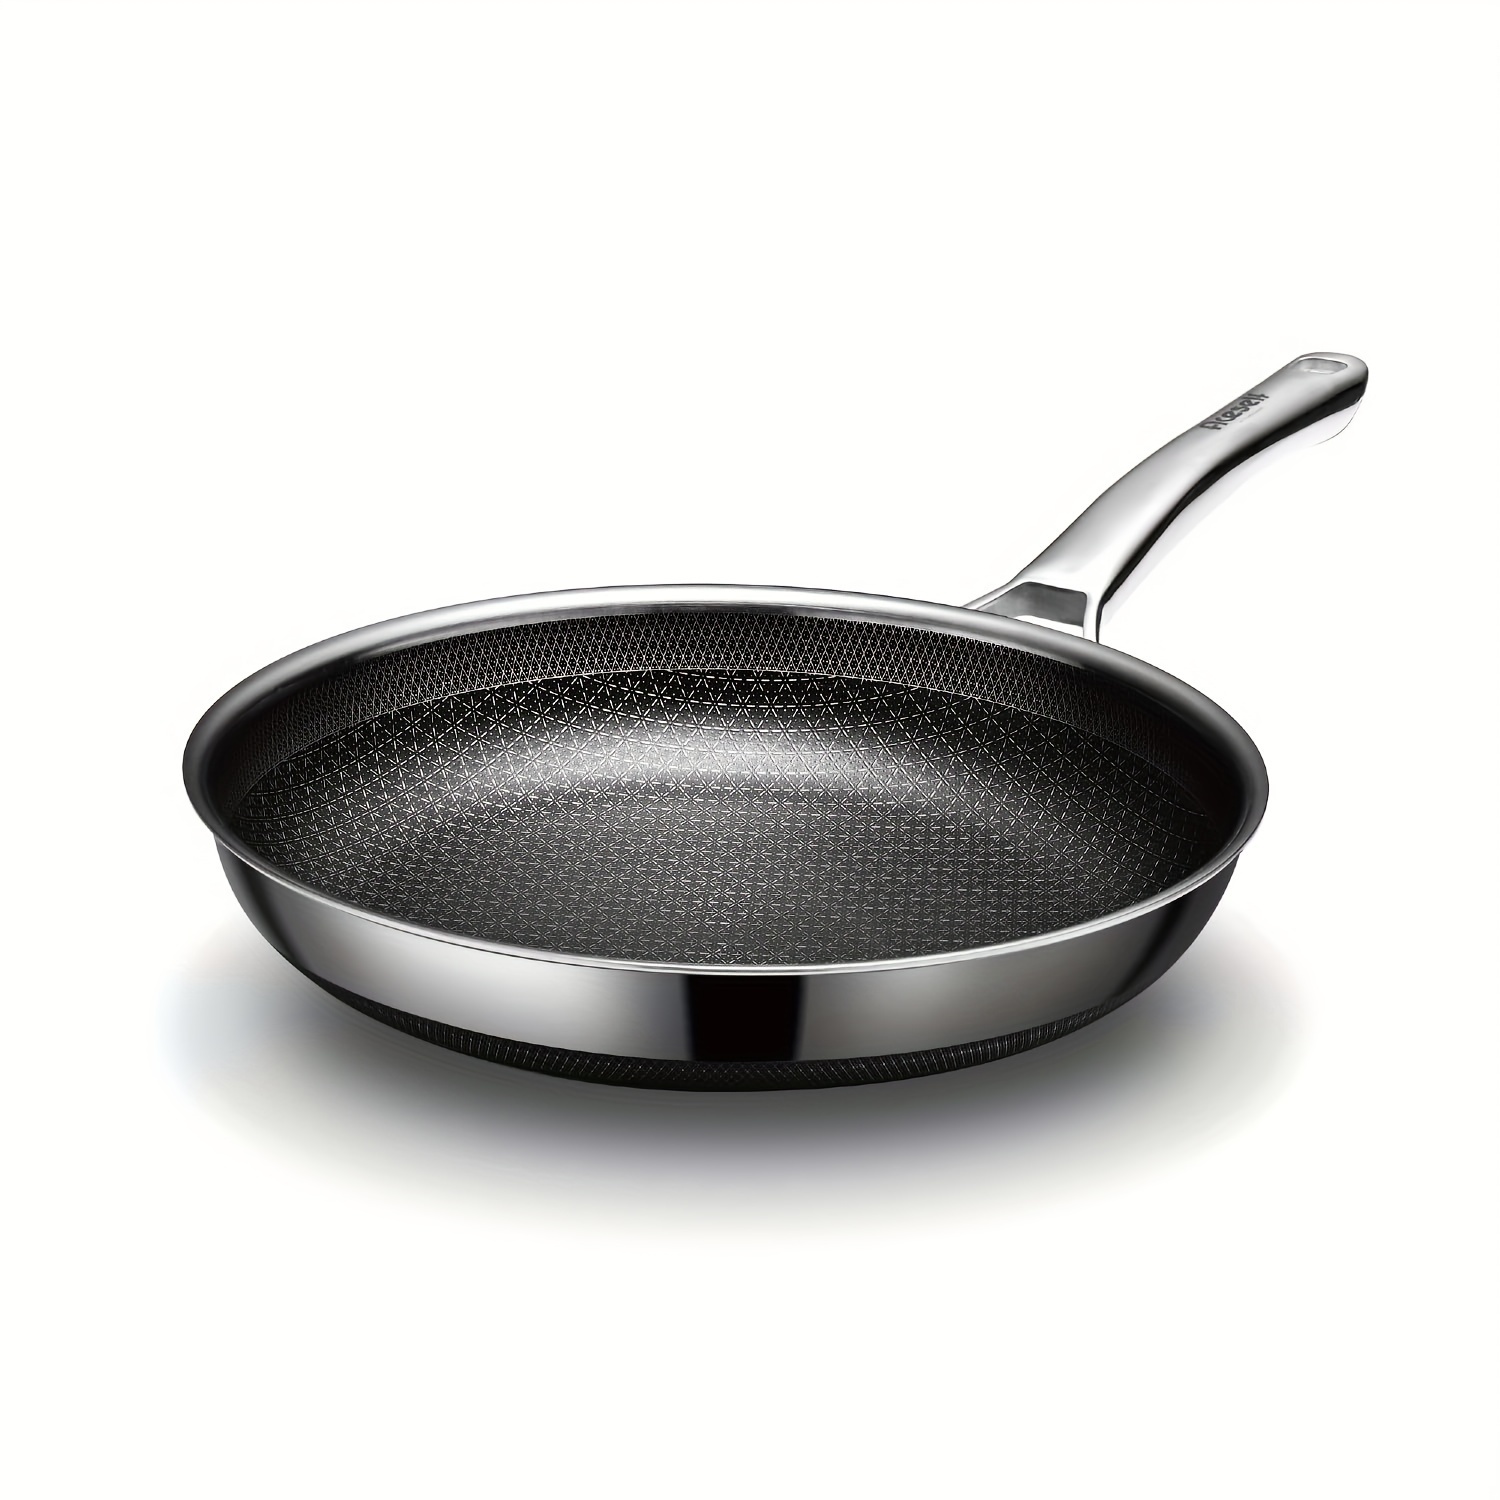 

Non Stick Frying Pans, 10 Inch Hybrid Frying Pans Nonstick, Non Stick Stainless Steel Skillets, Pfoa Free Cookware, Dishwasher And Oven Safe, Works On All Cooktops